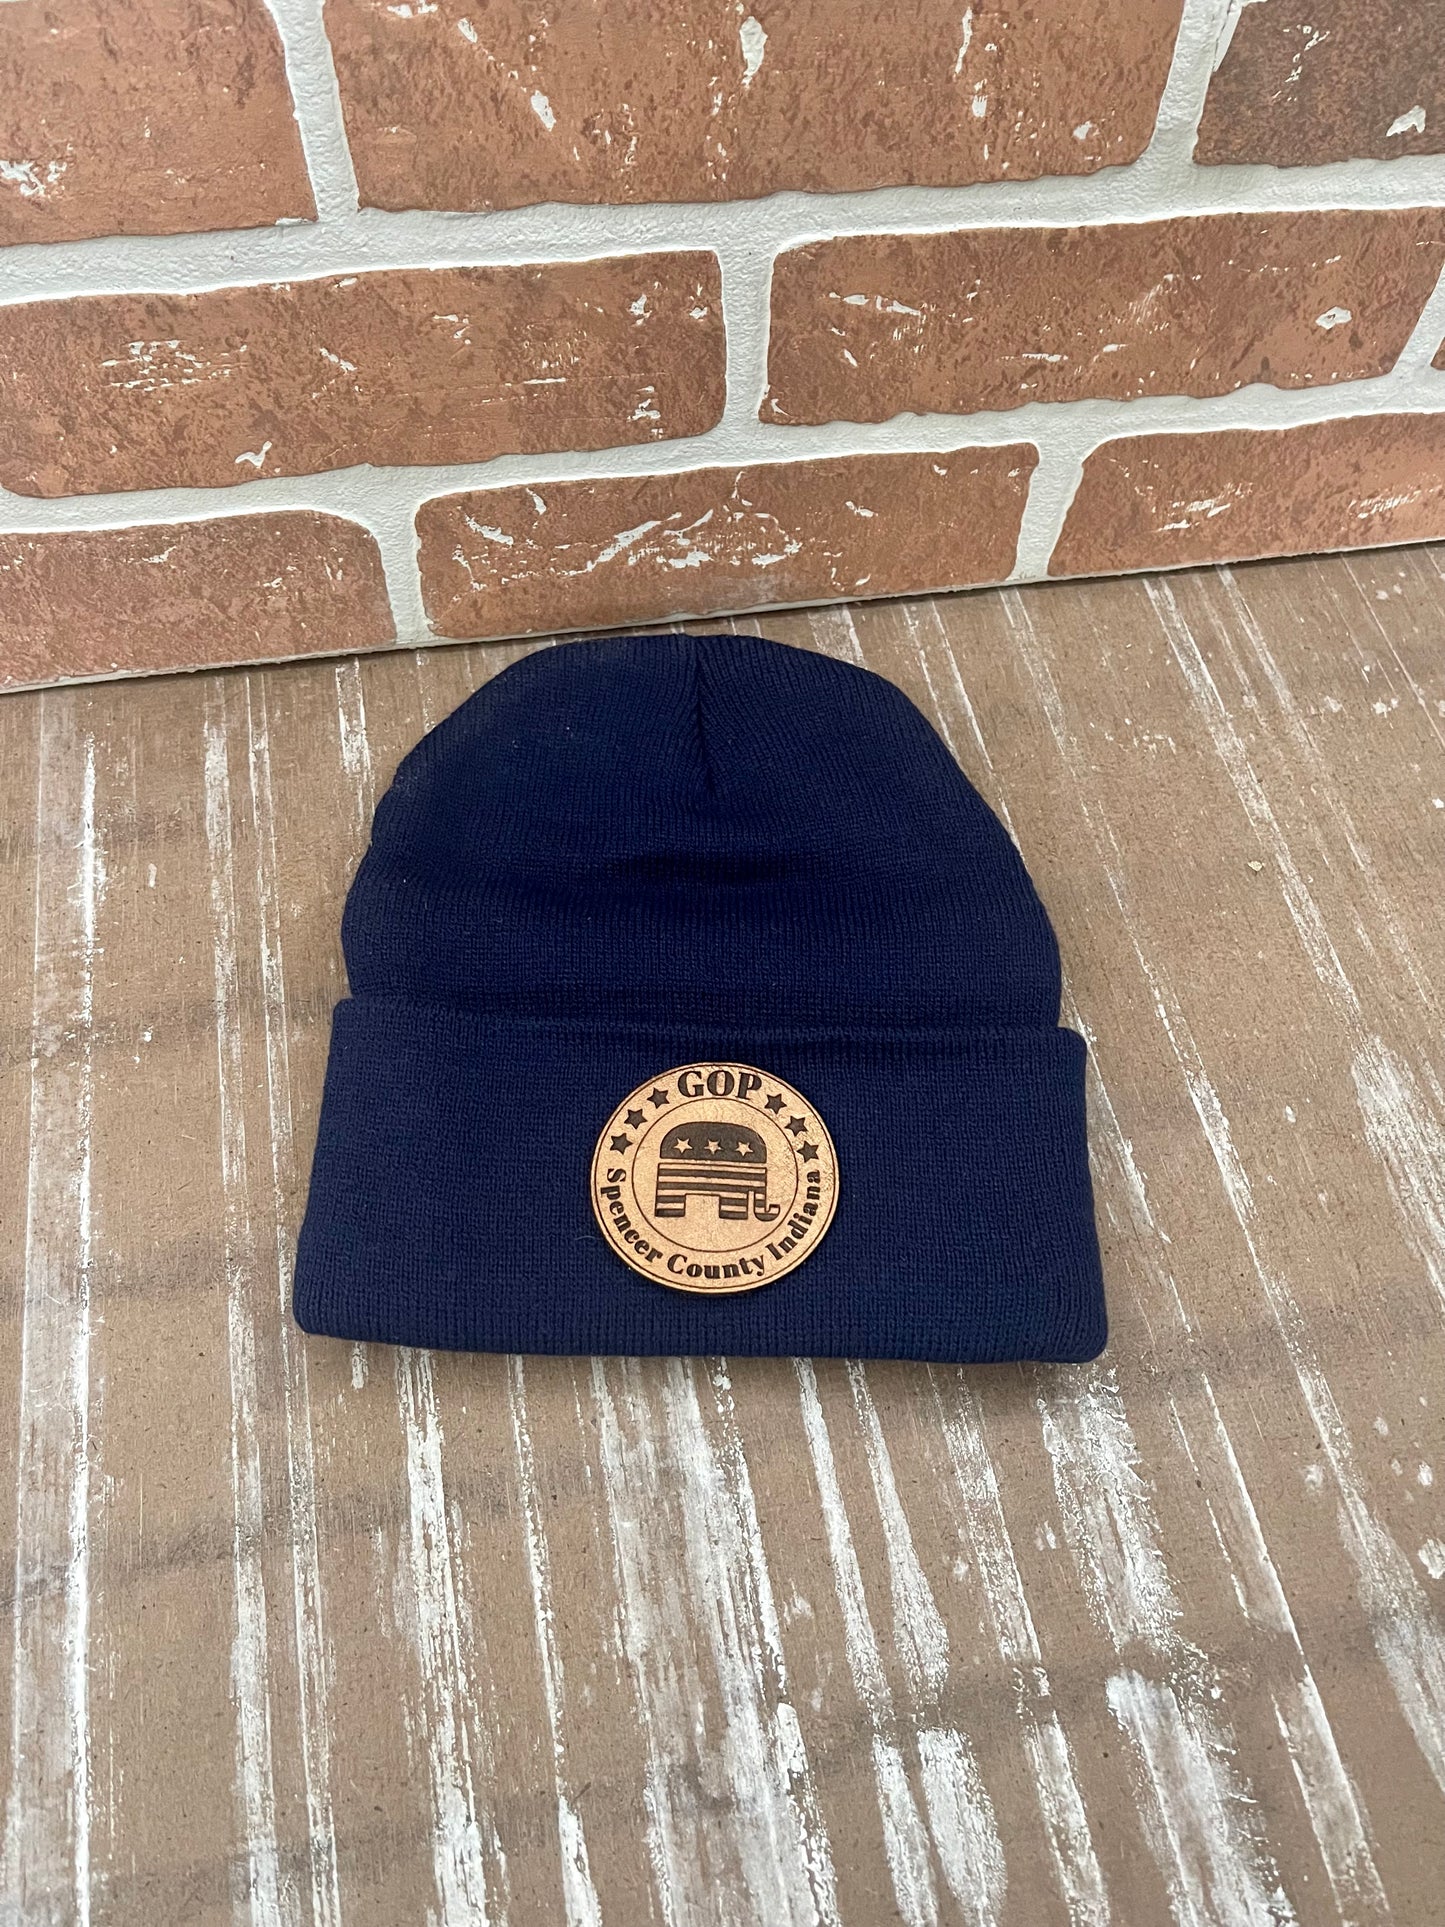 Spencer Co GOP Adult Beanies